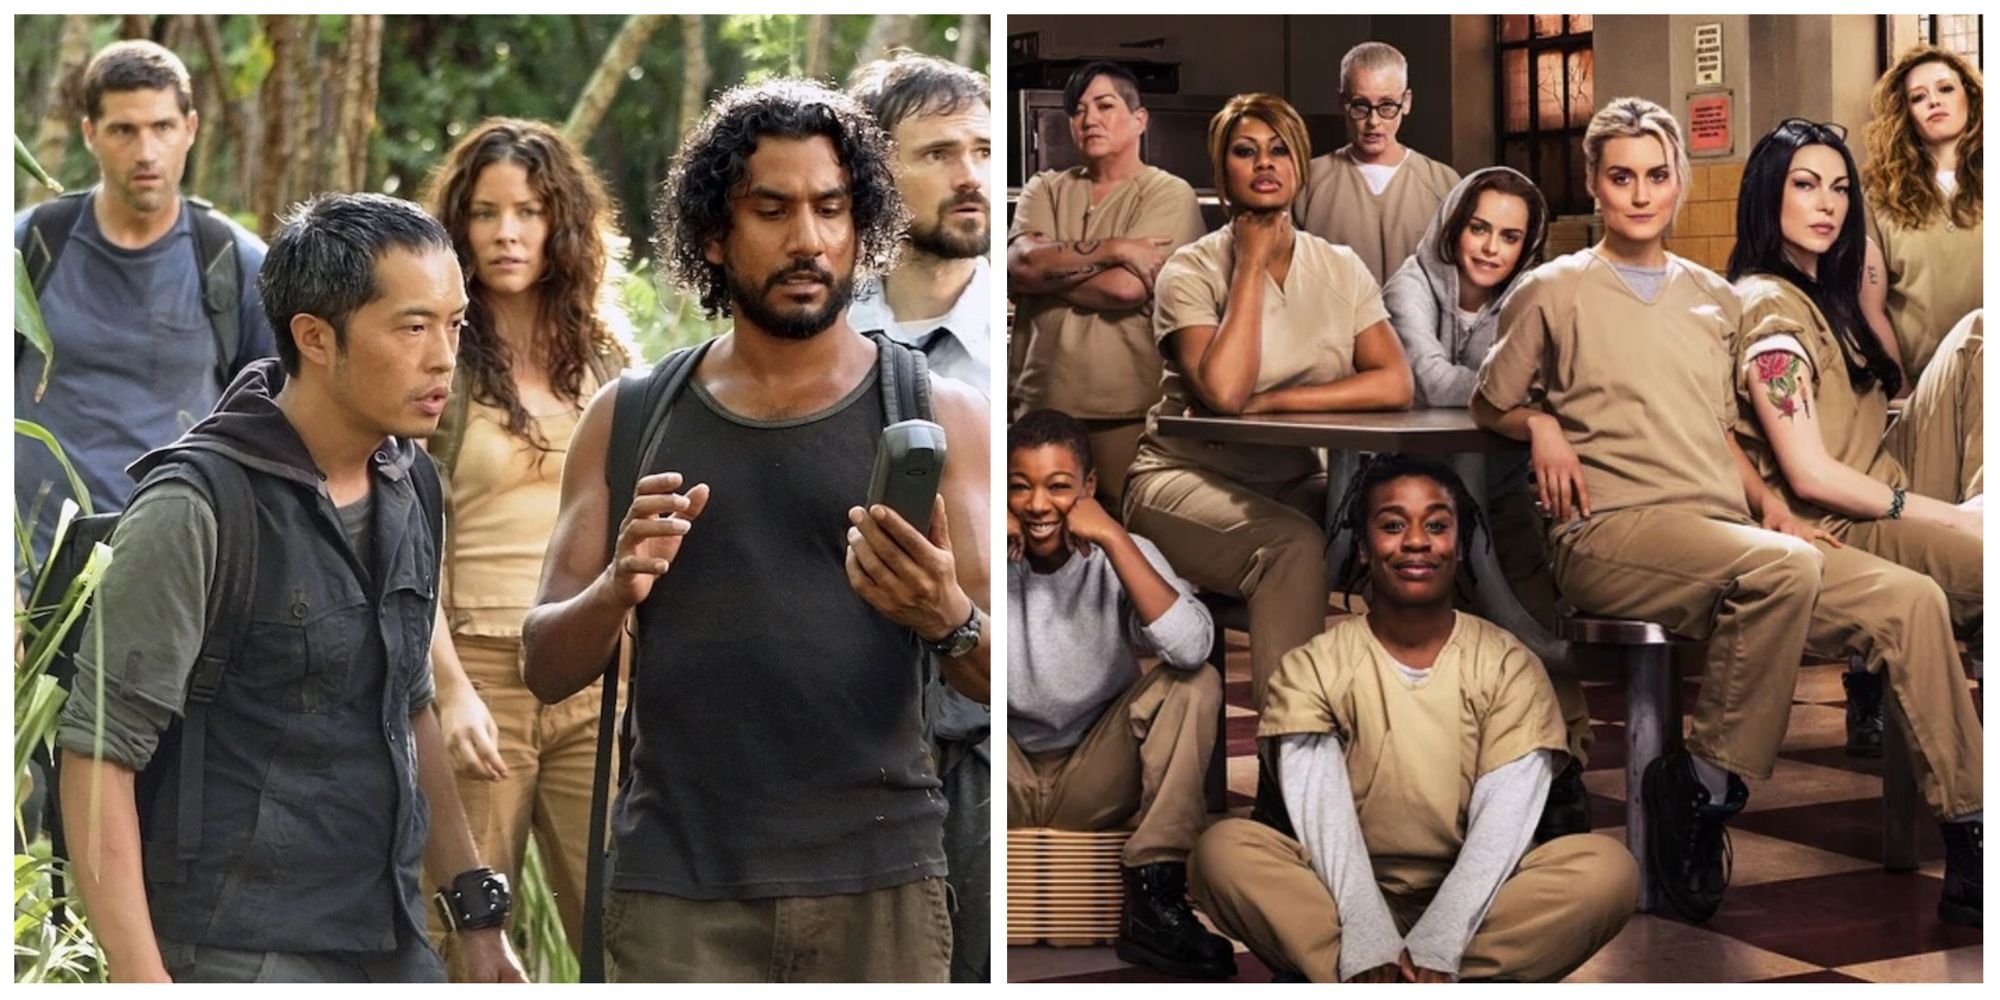 Split image of Lost and Orange is the New Black